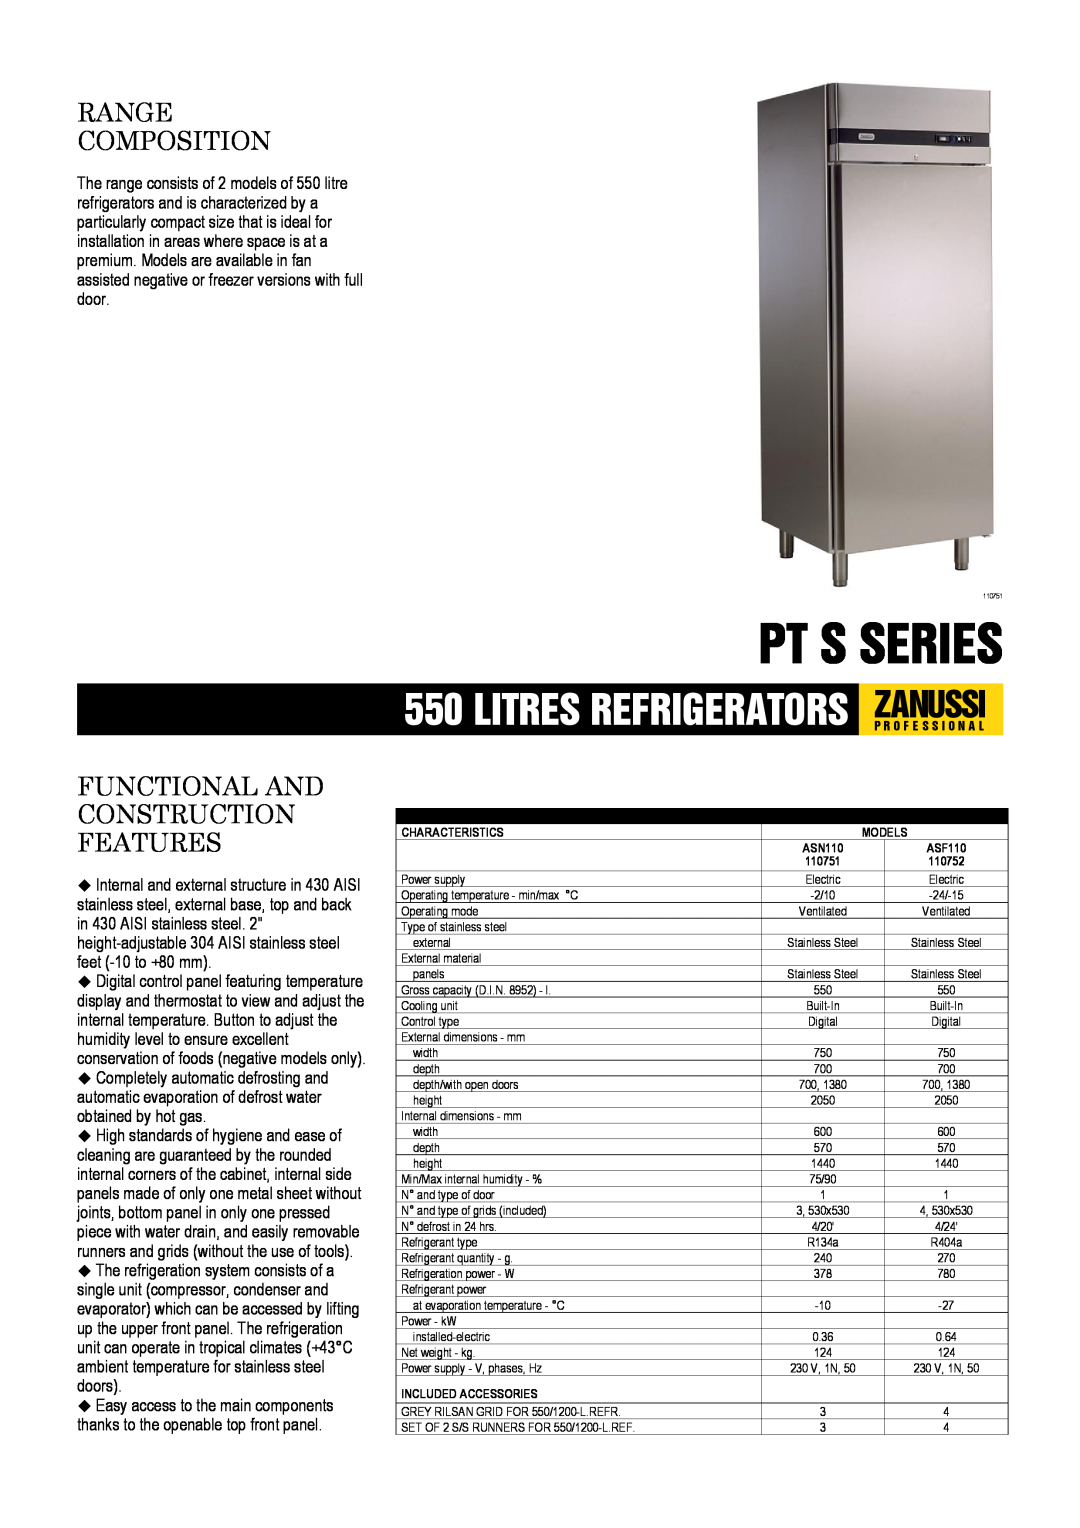 Zanussi ASF110, ASN110, PT S Series, 110752 dimensions Pt S Series, Range Composition, Functional And Construction Features 